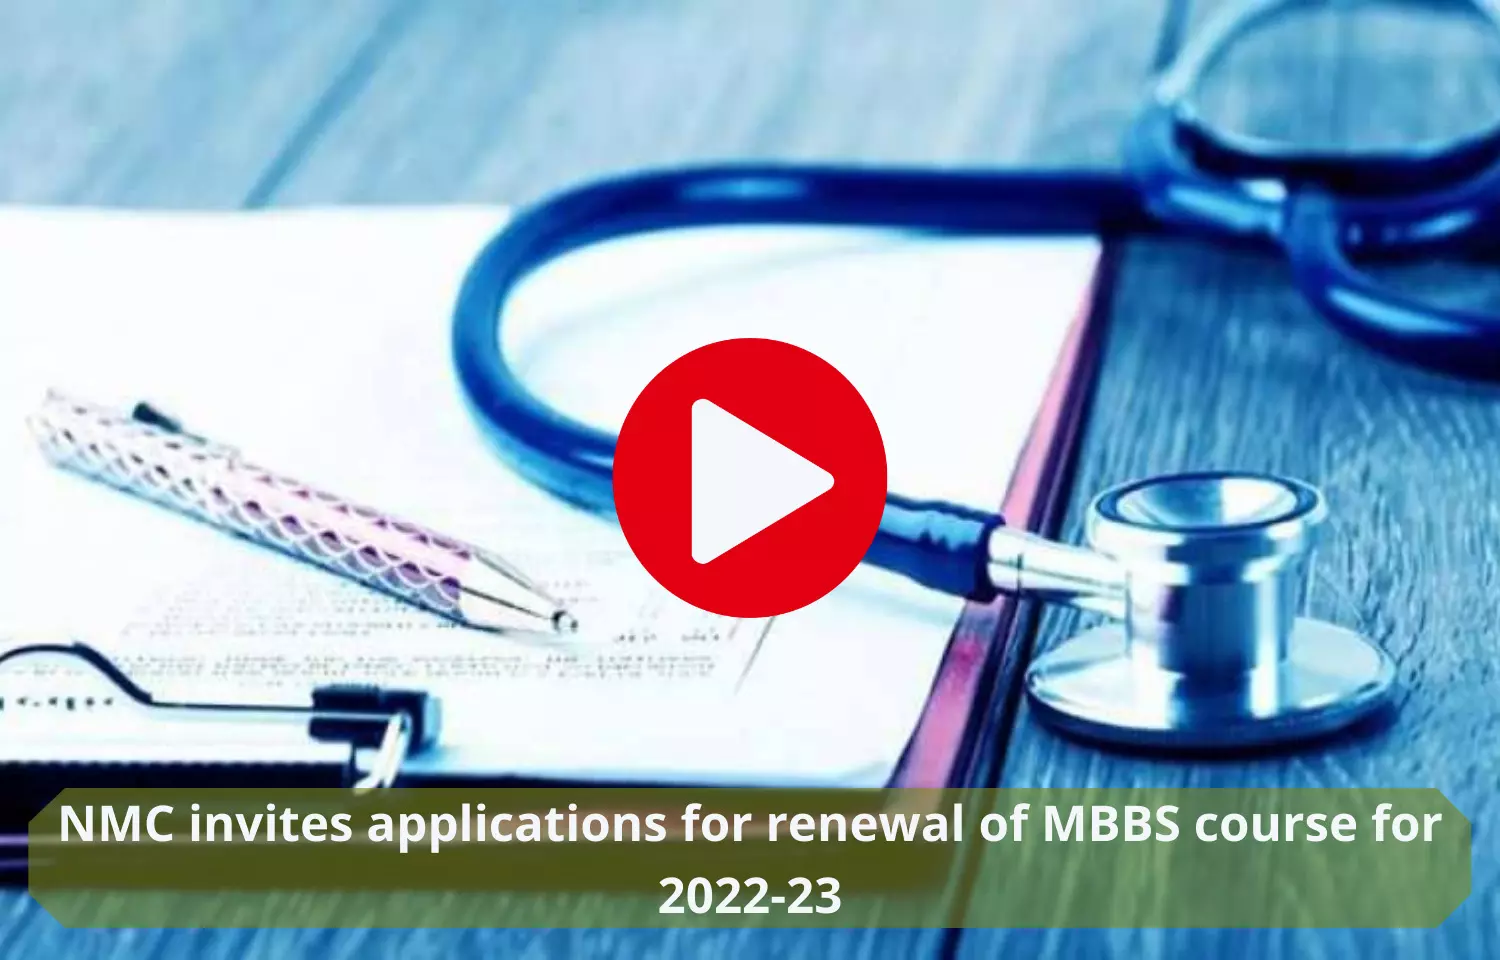 NMC invites applications for renewal of MBBS course for academic year 2022-23